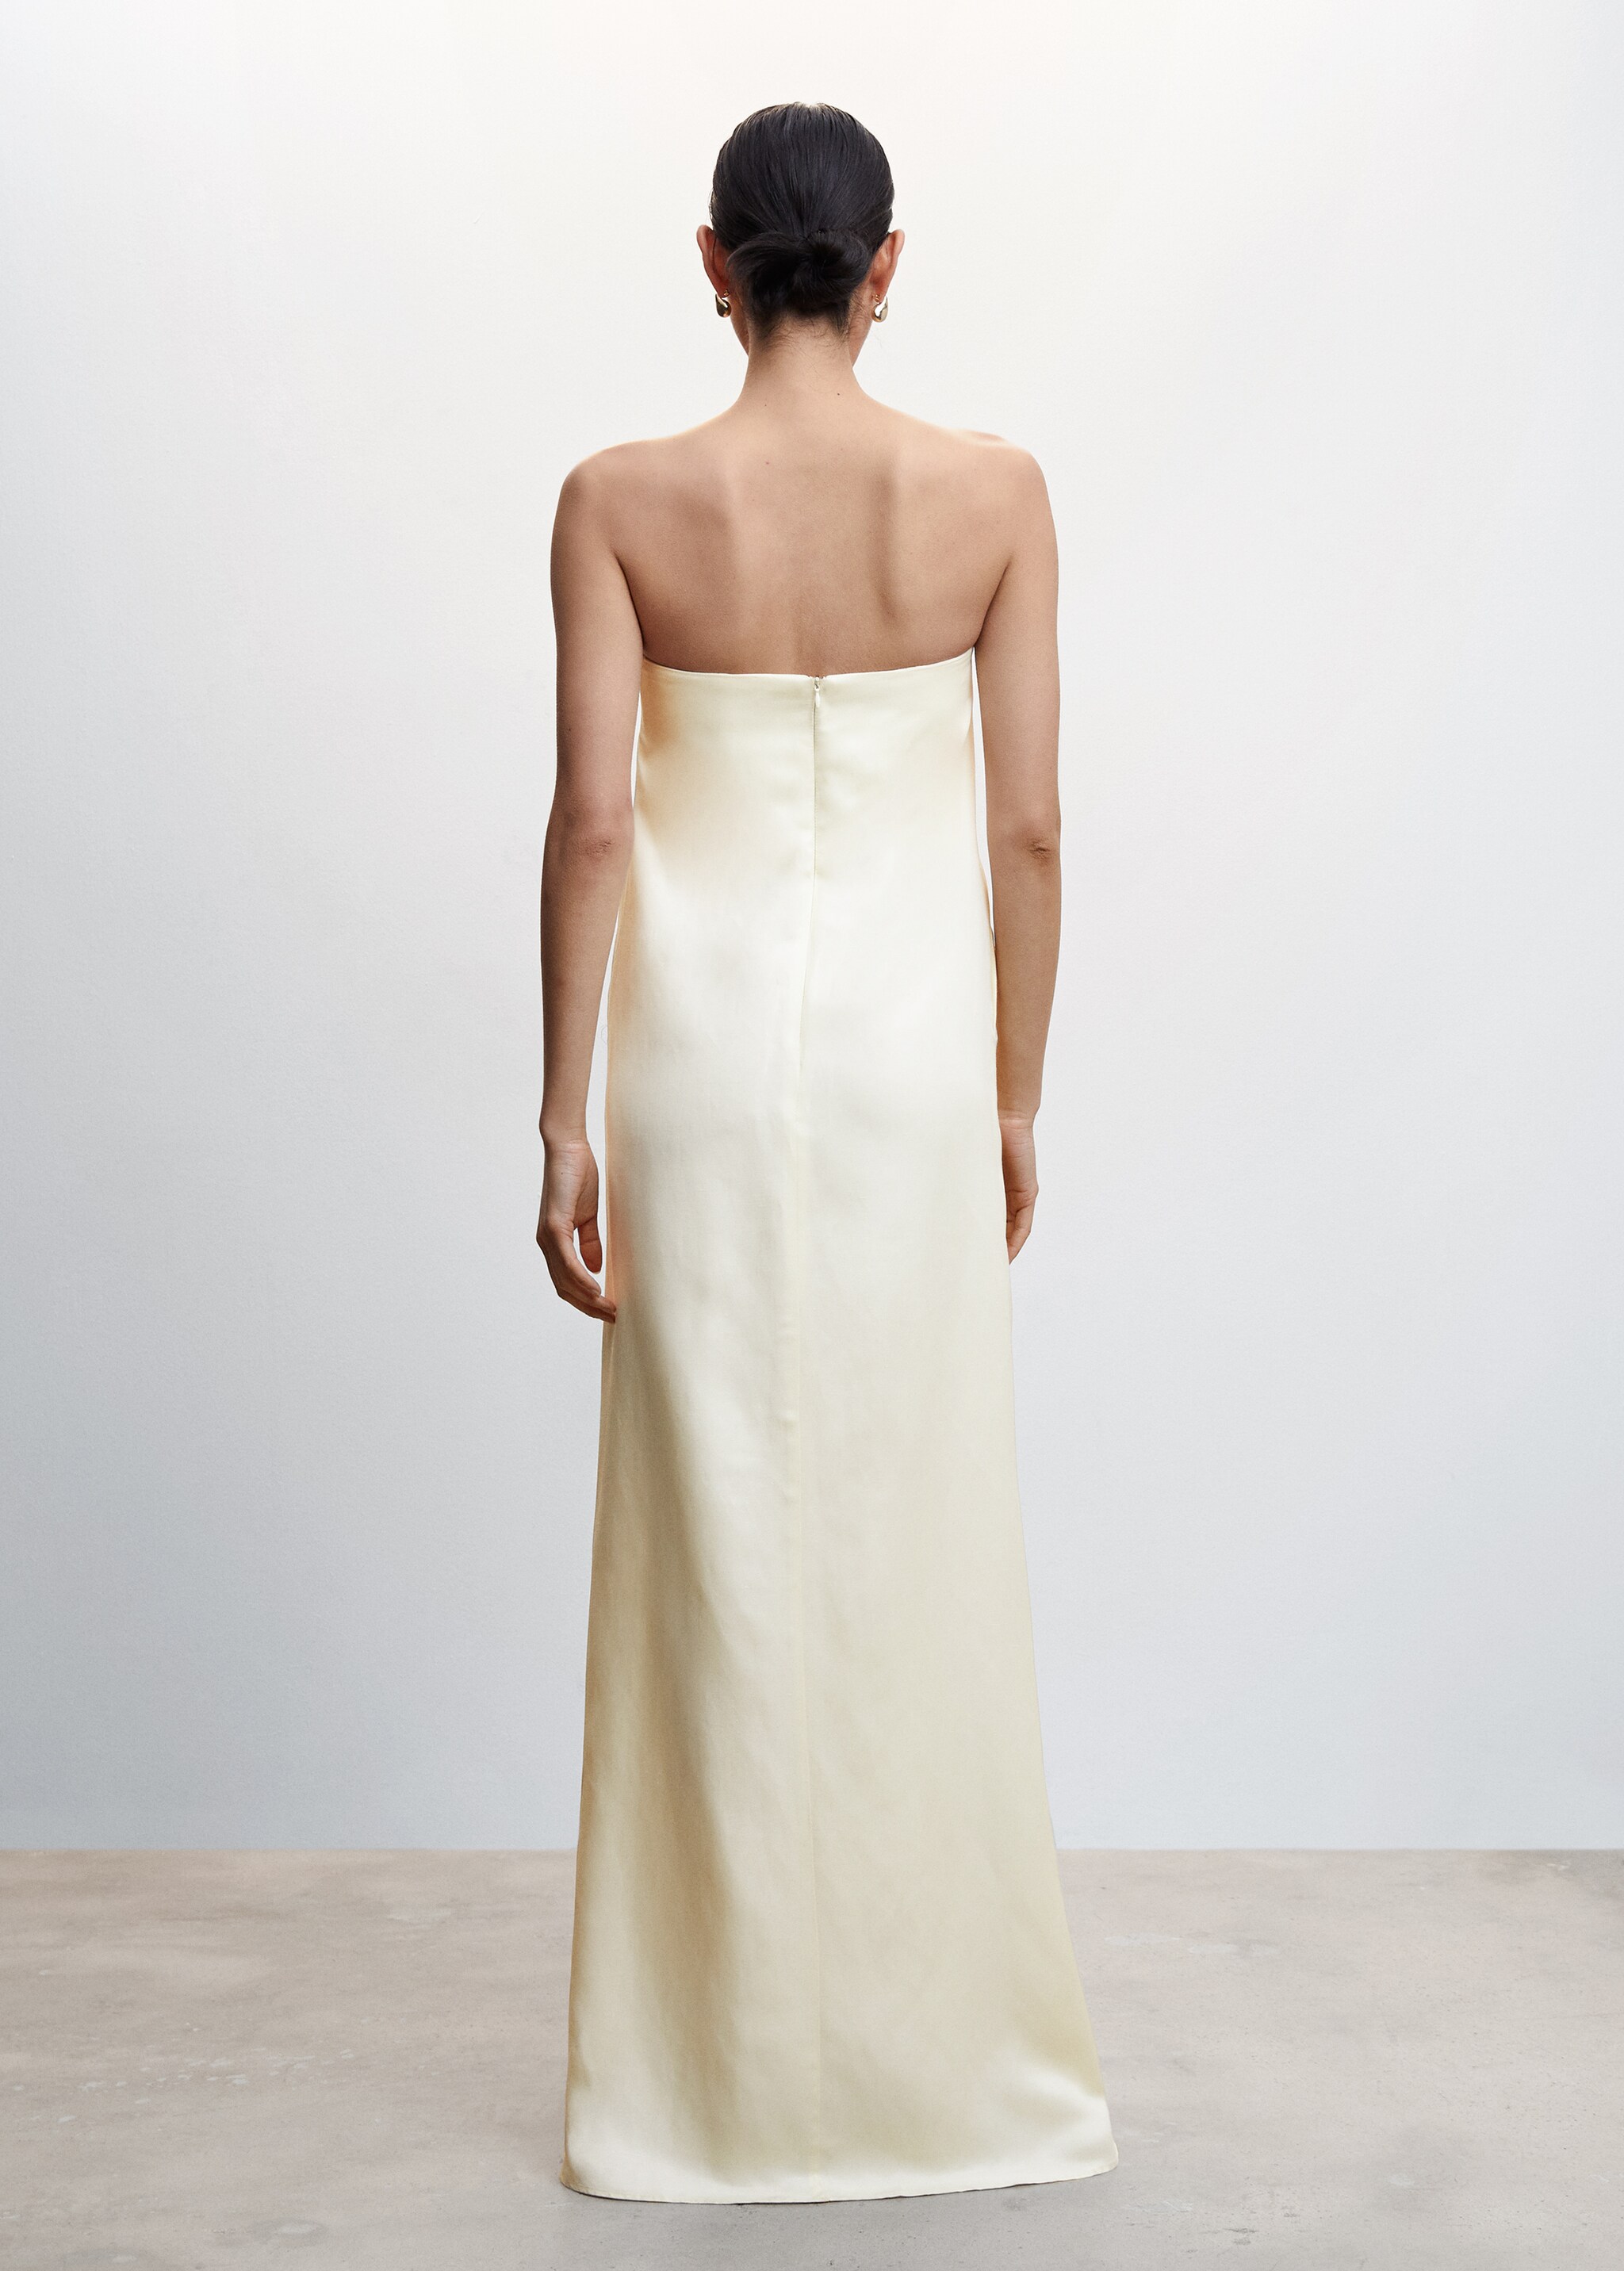 Strapless dress - Reverse of the article